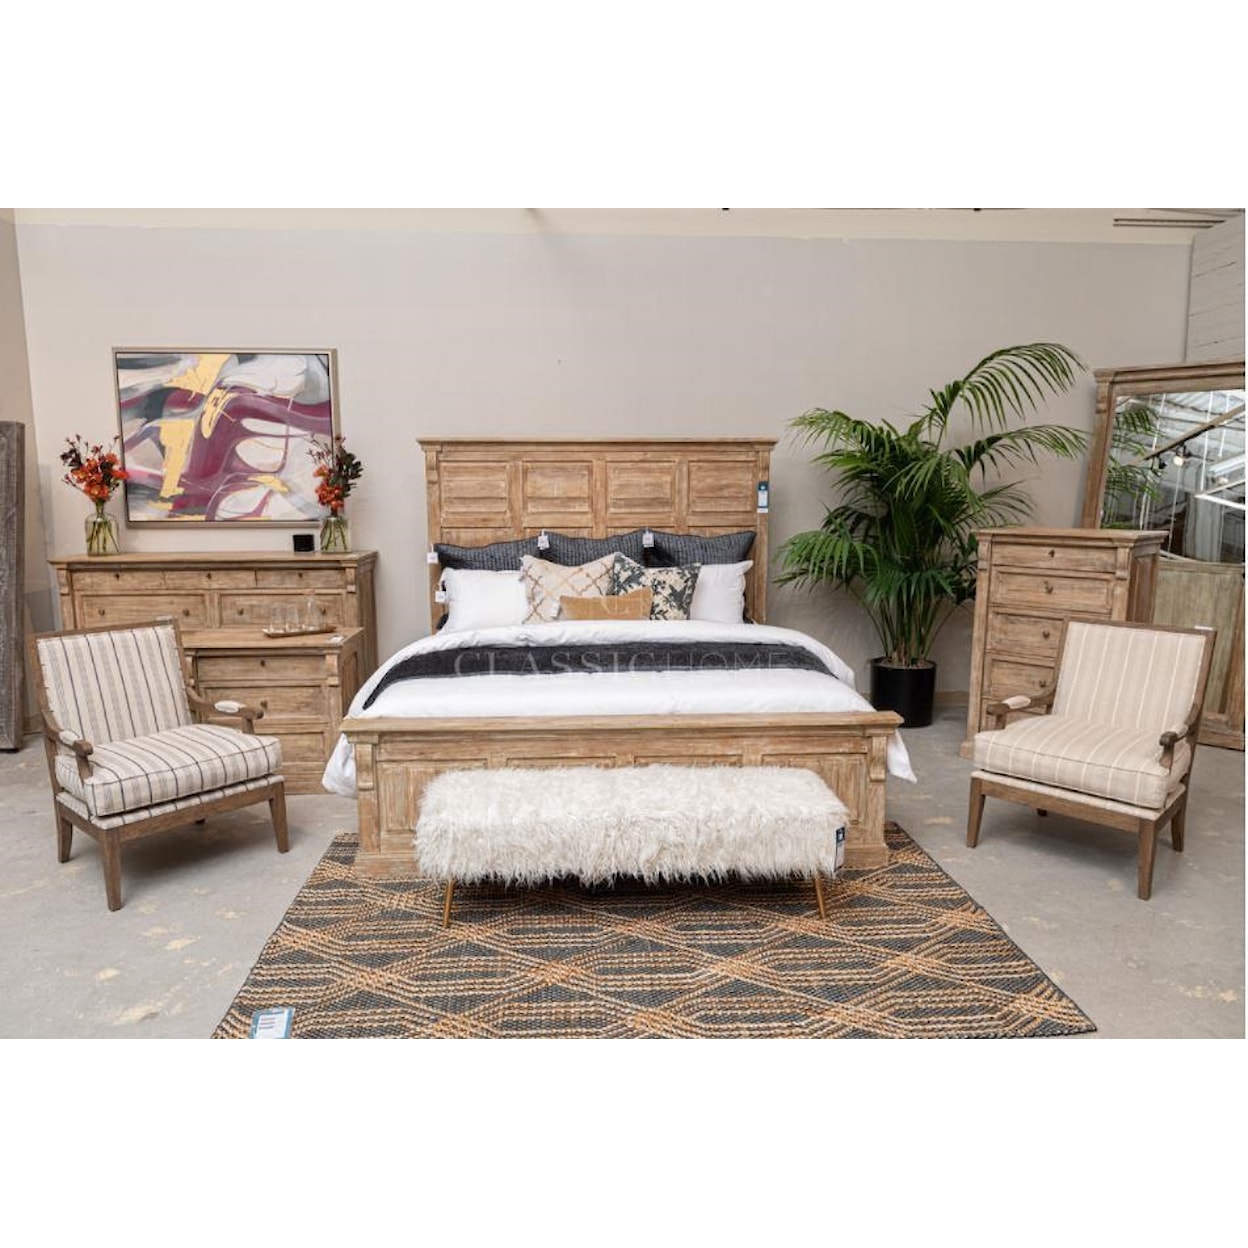 Classic Home Adelaide Adelaide Cali King Bedroom Group